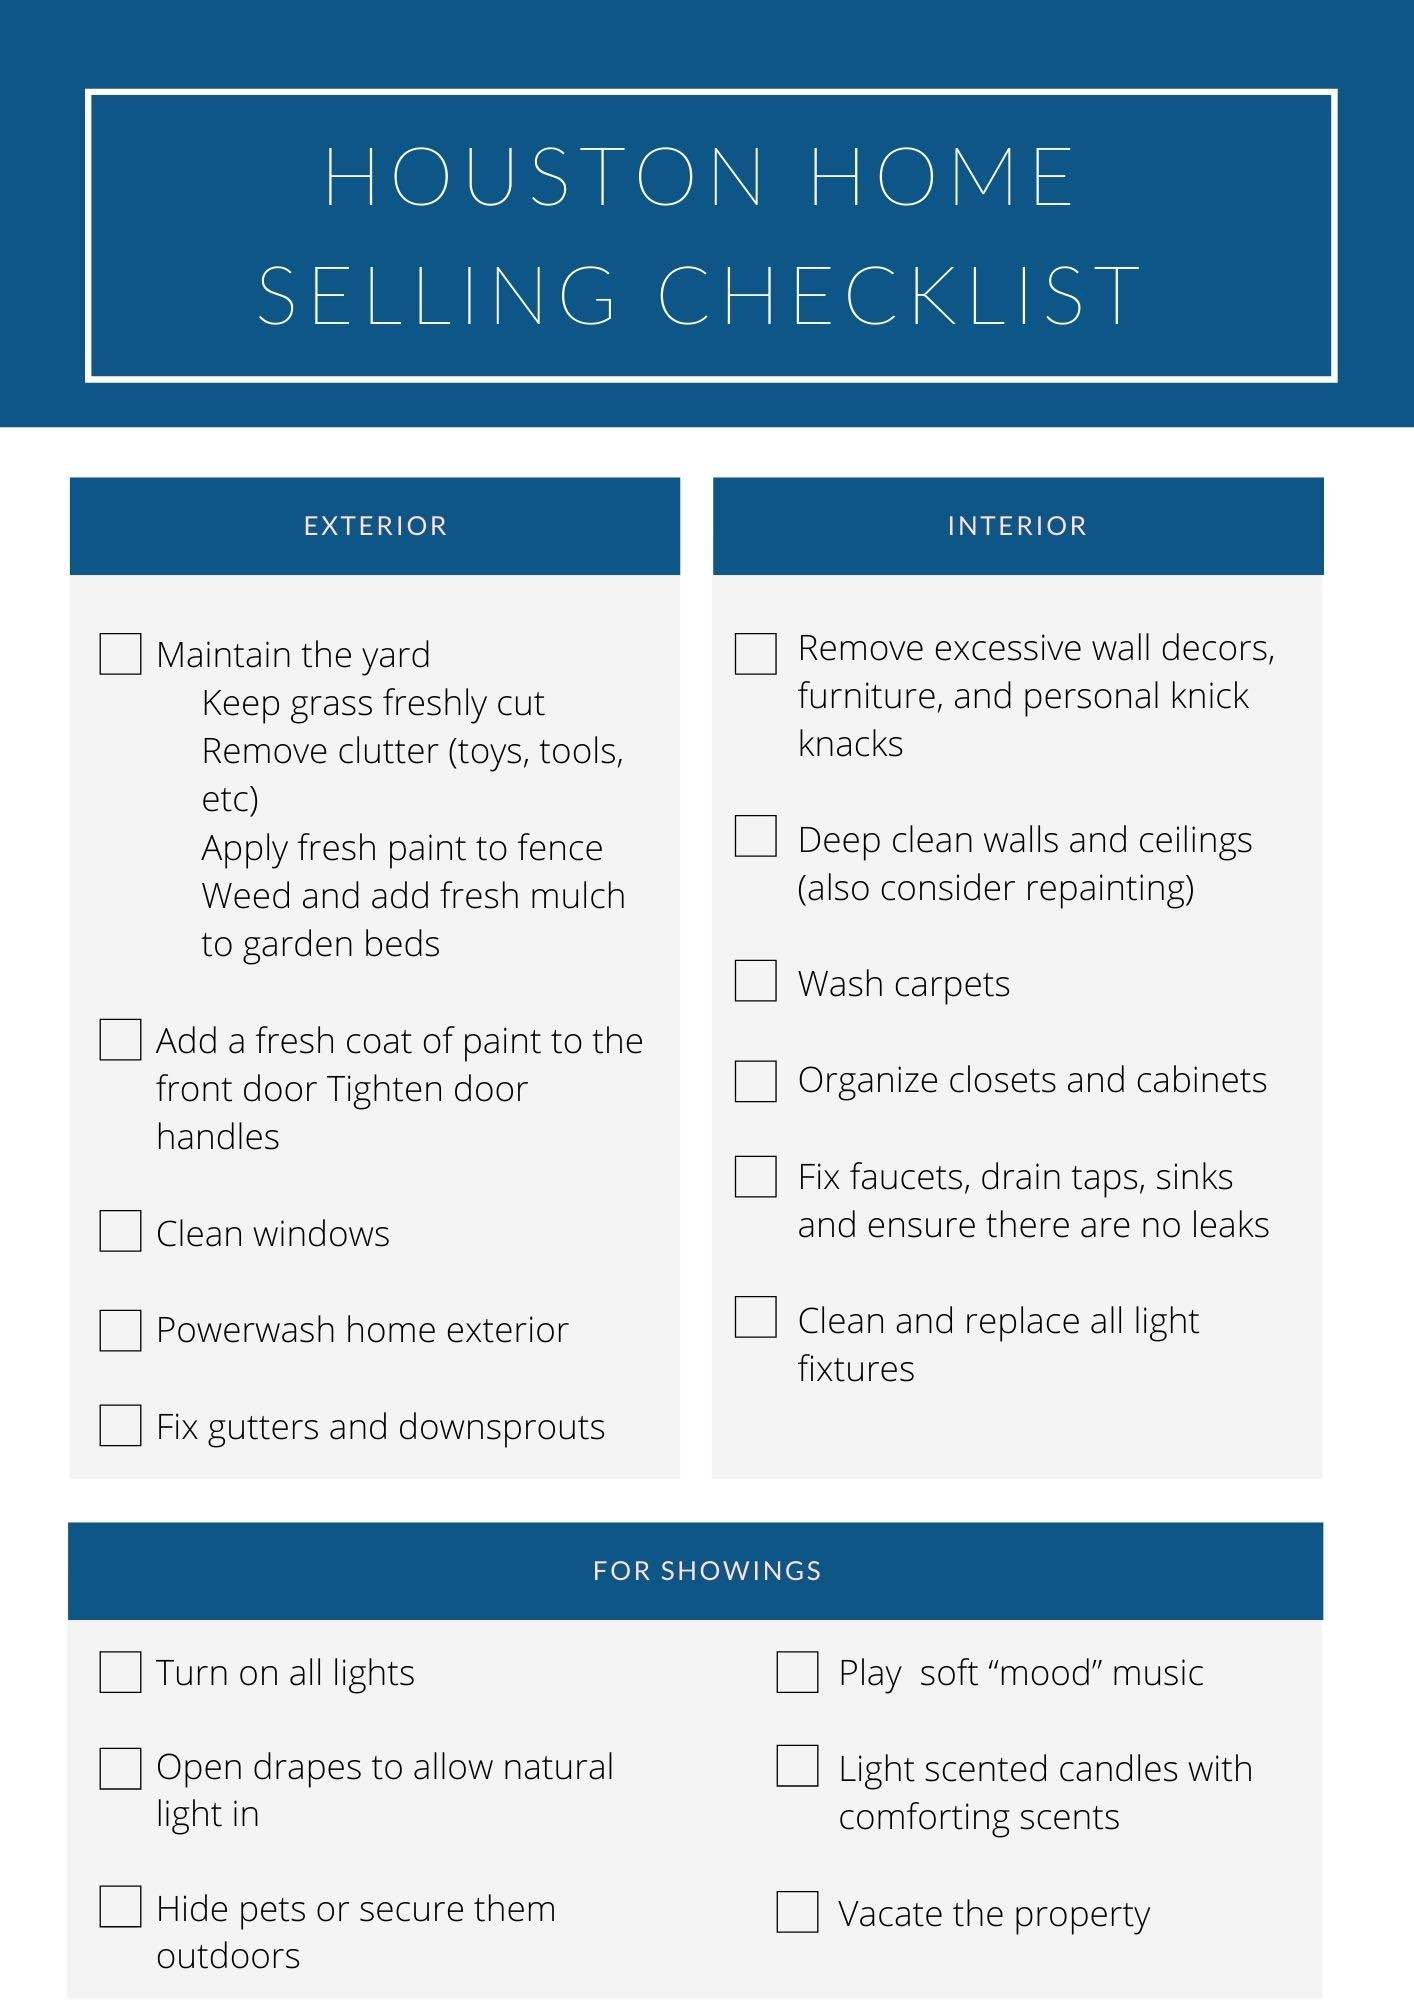 Home selling checklist